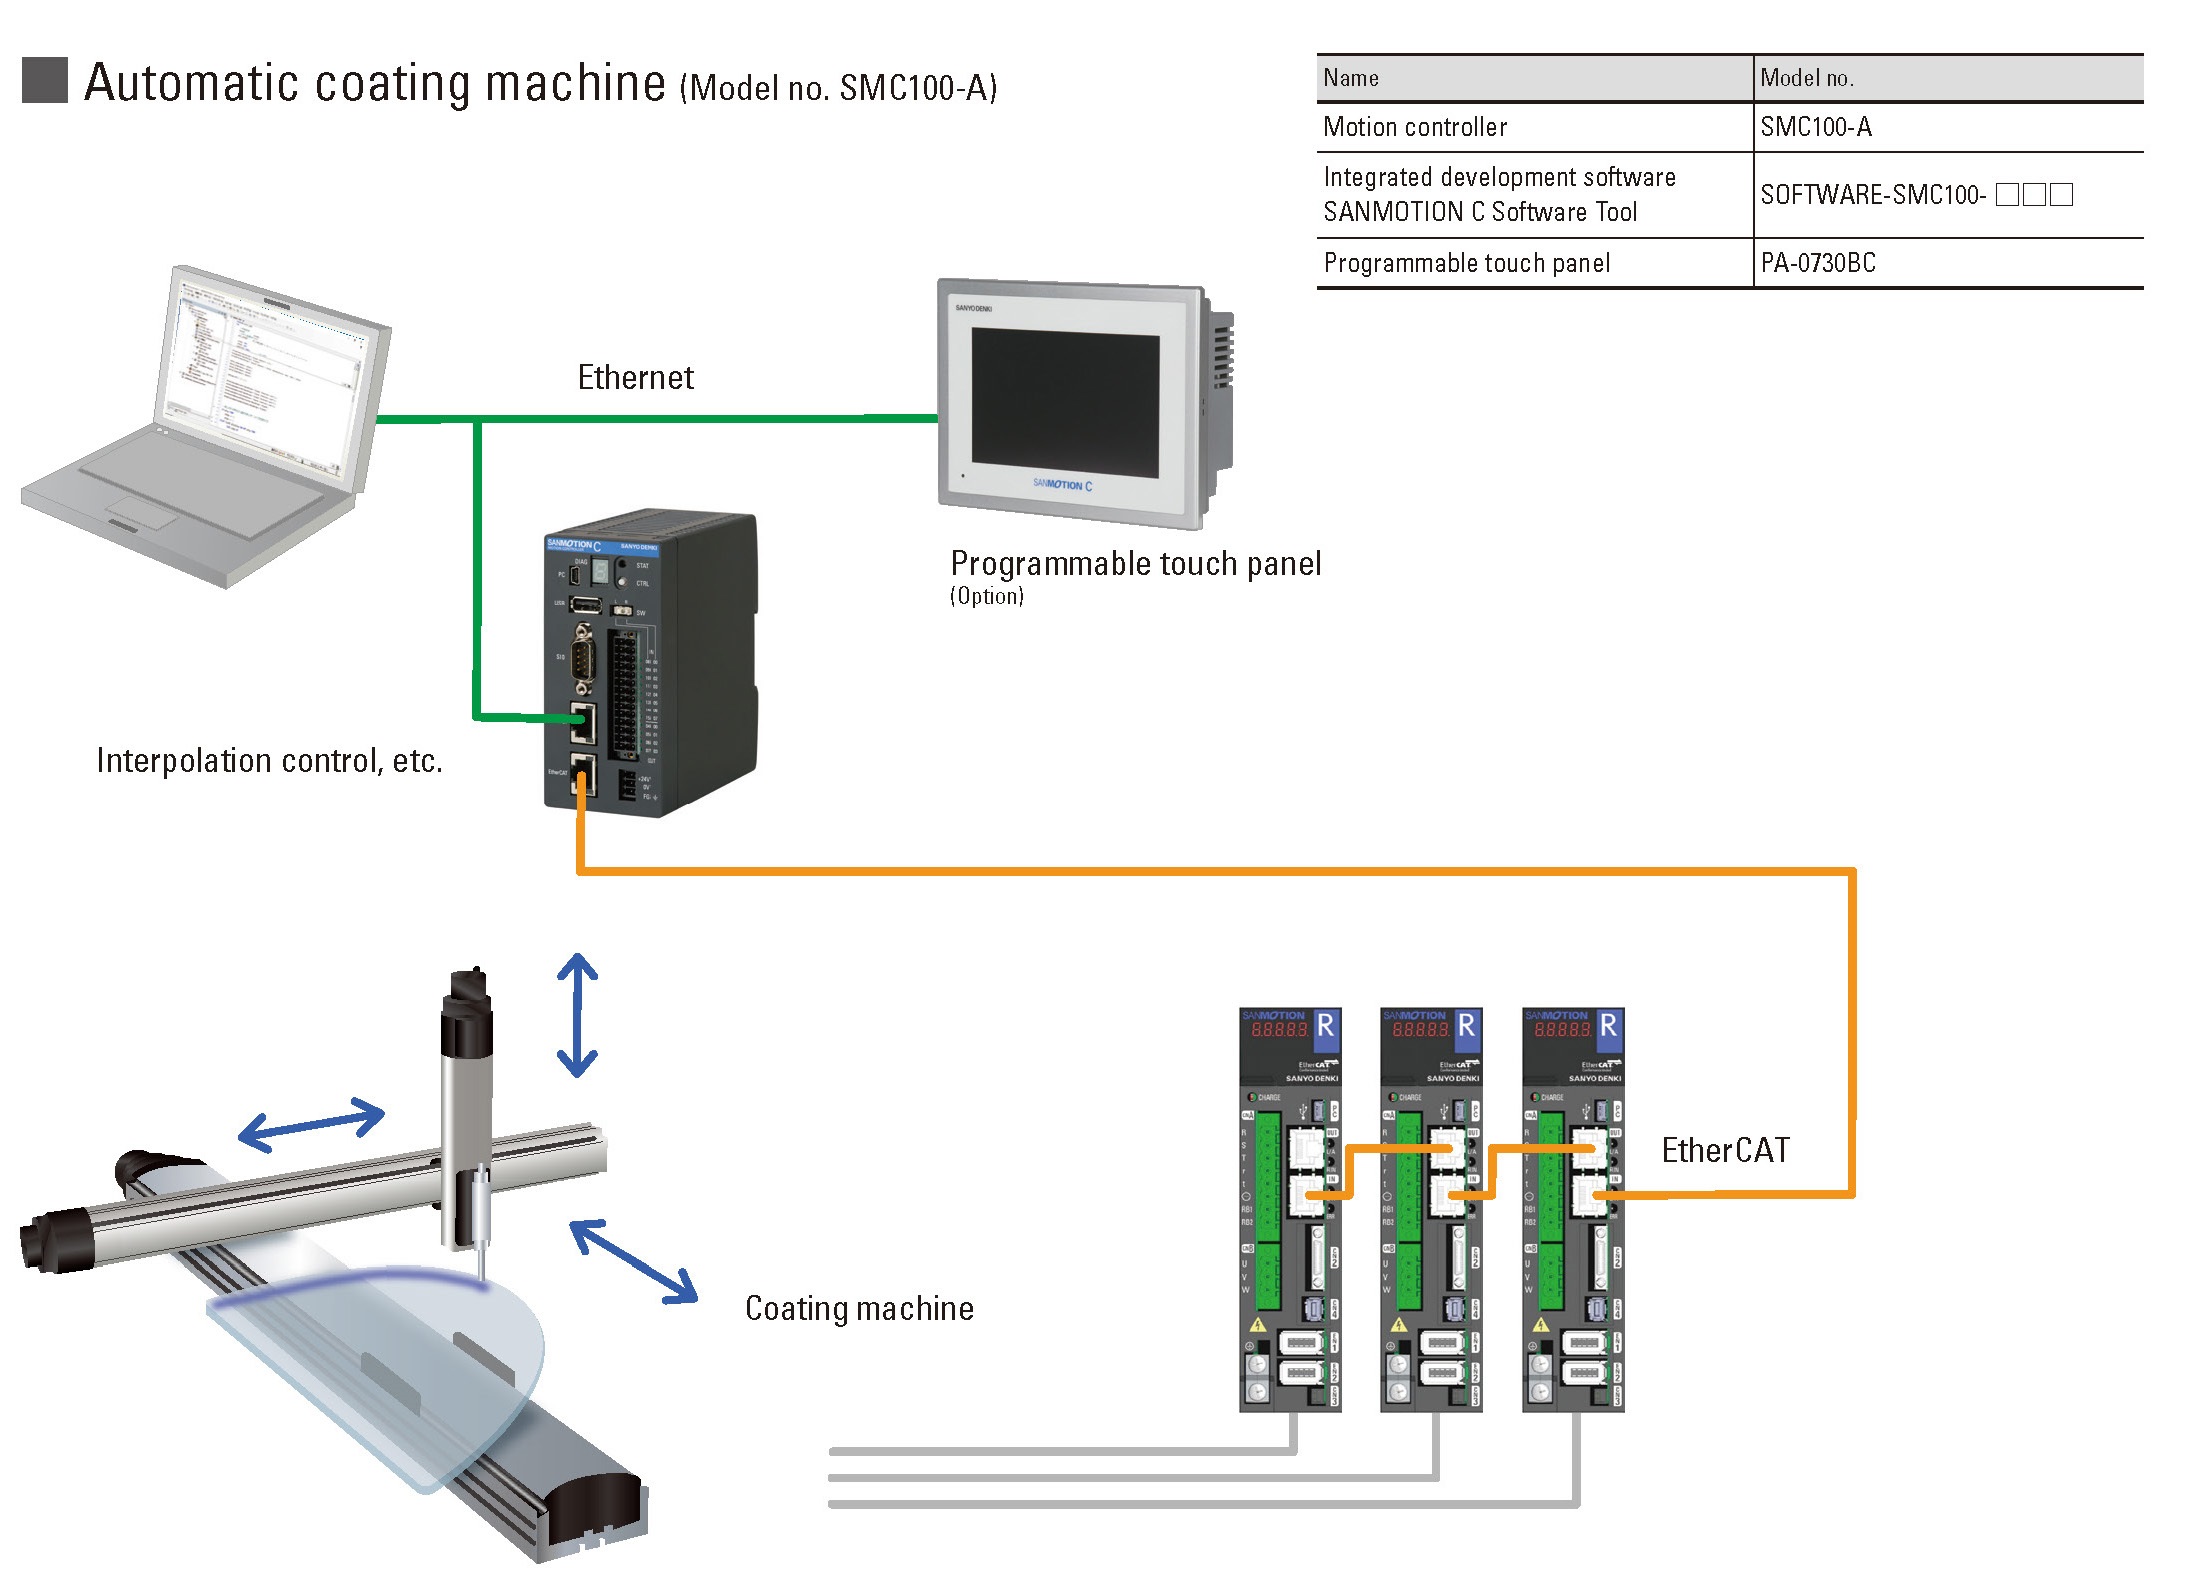 motion controller for coating machines